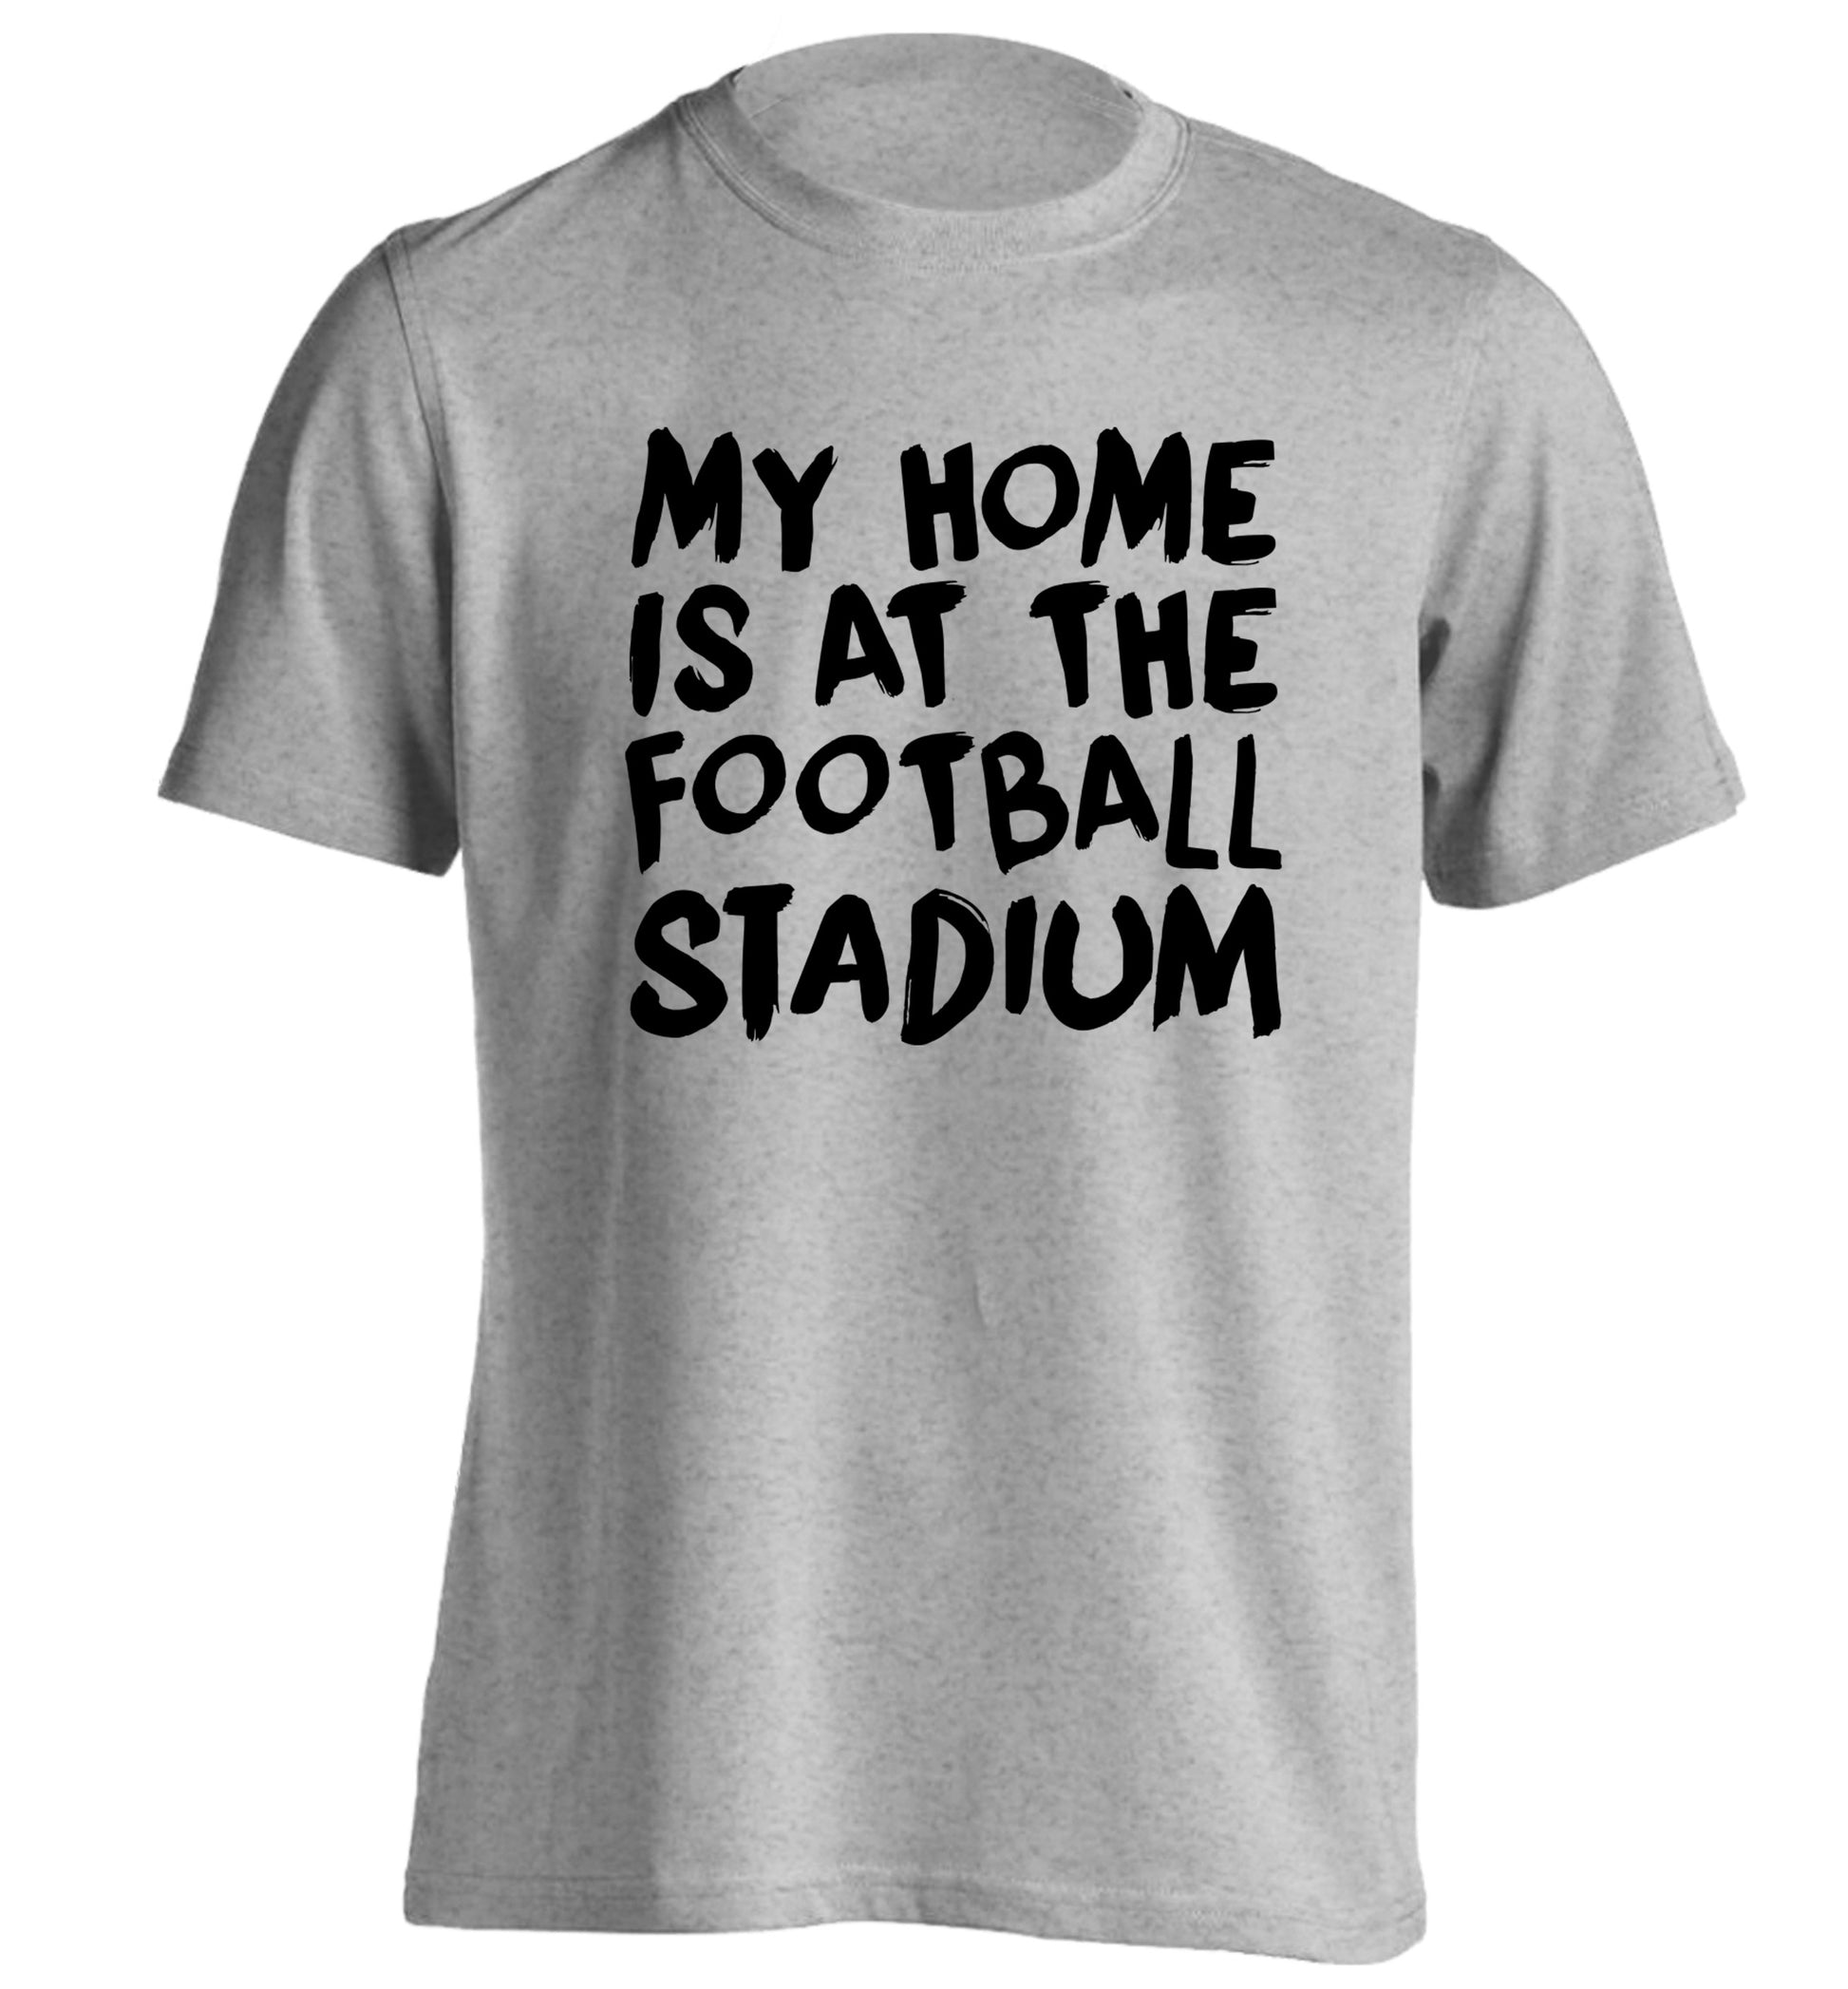 My home is at the football stadium adults unisex grey Tshirt 2XL